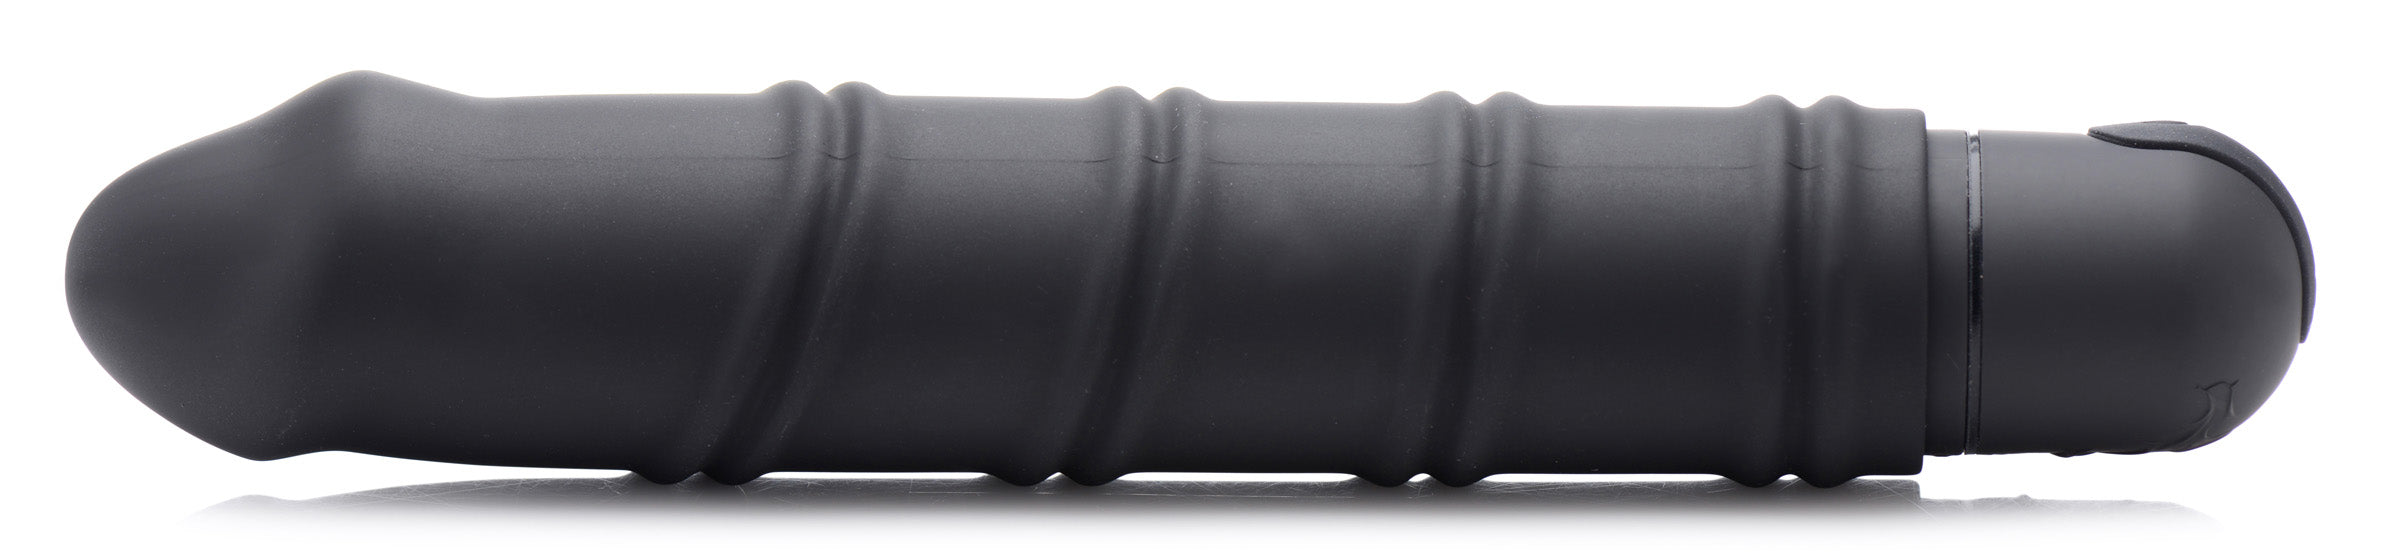 XL Silicone Bullet and Swirl Sleeve